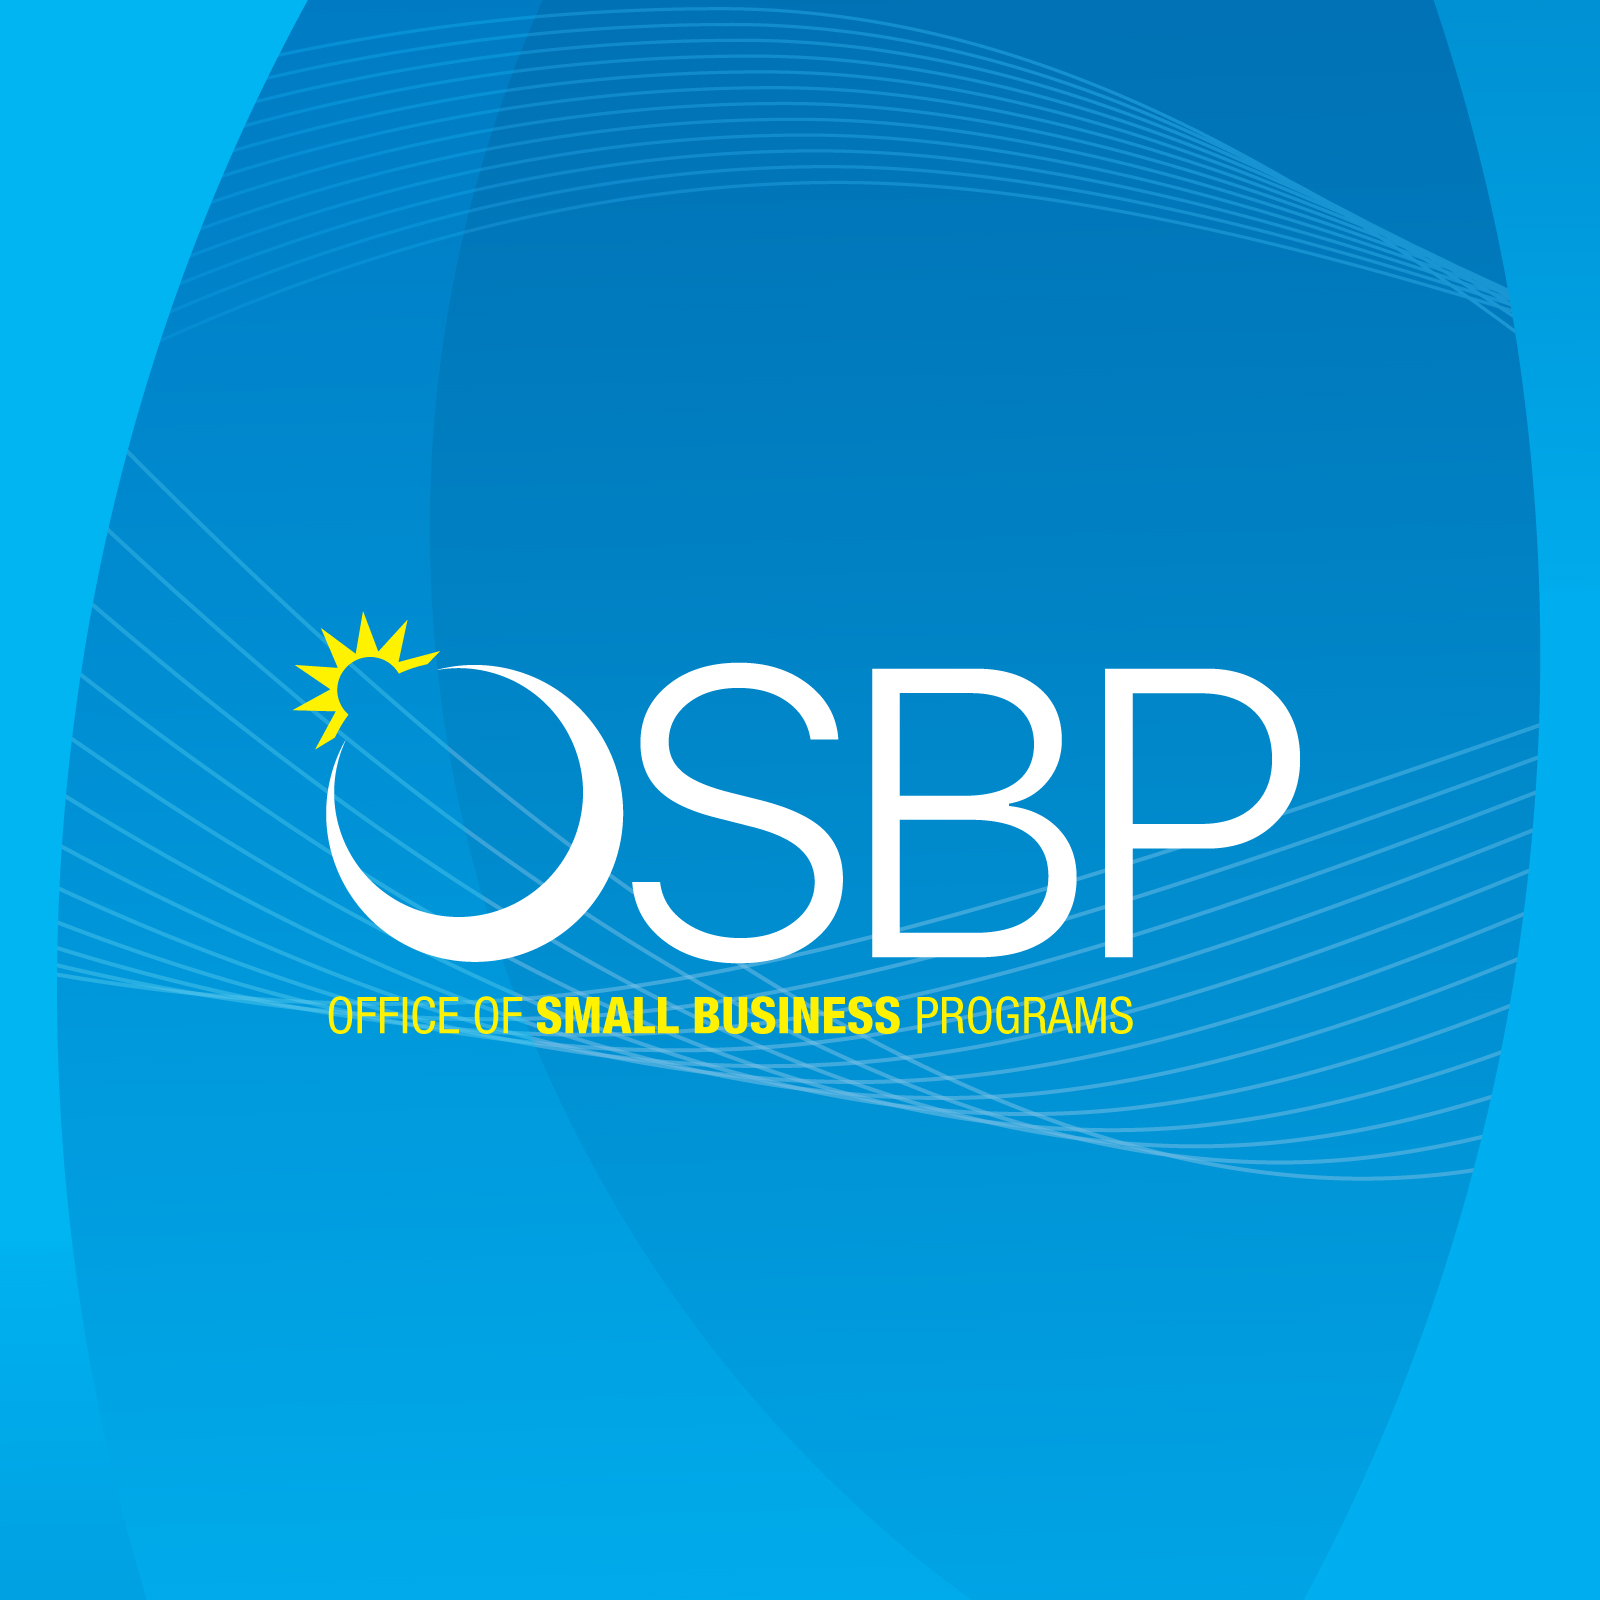 Office of Small Business Programs